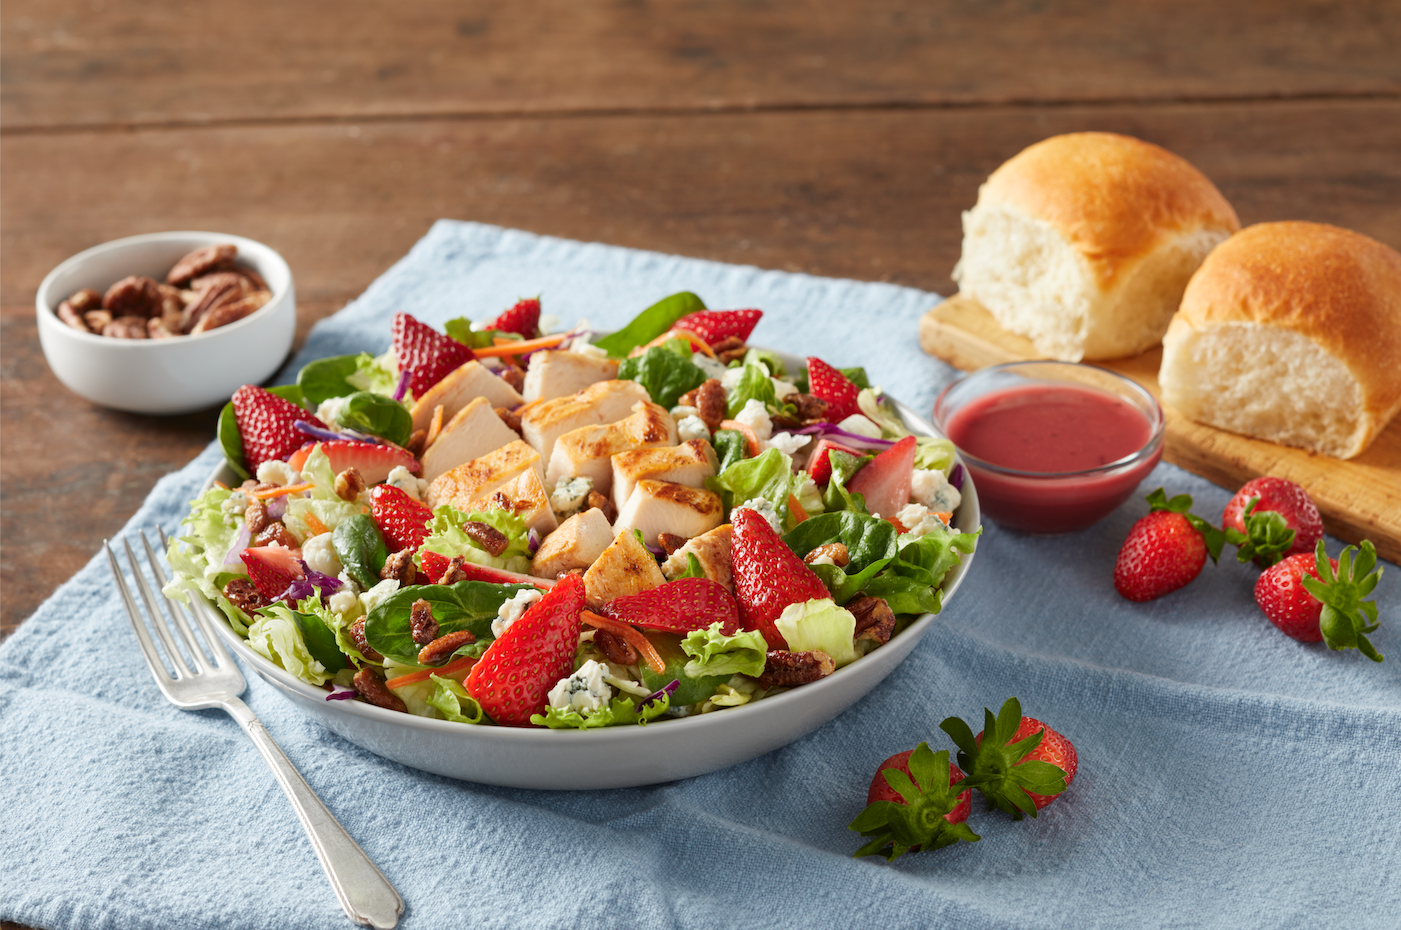 The Summer Berry Salad is a bed of fresh greens topped with chicken grilled to perfection, vine-ripened strawberries, pecans, real blue cheese and a lite berry vinaigrette.